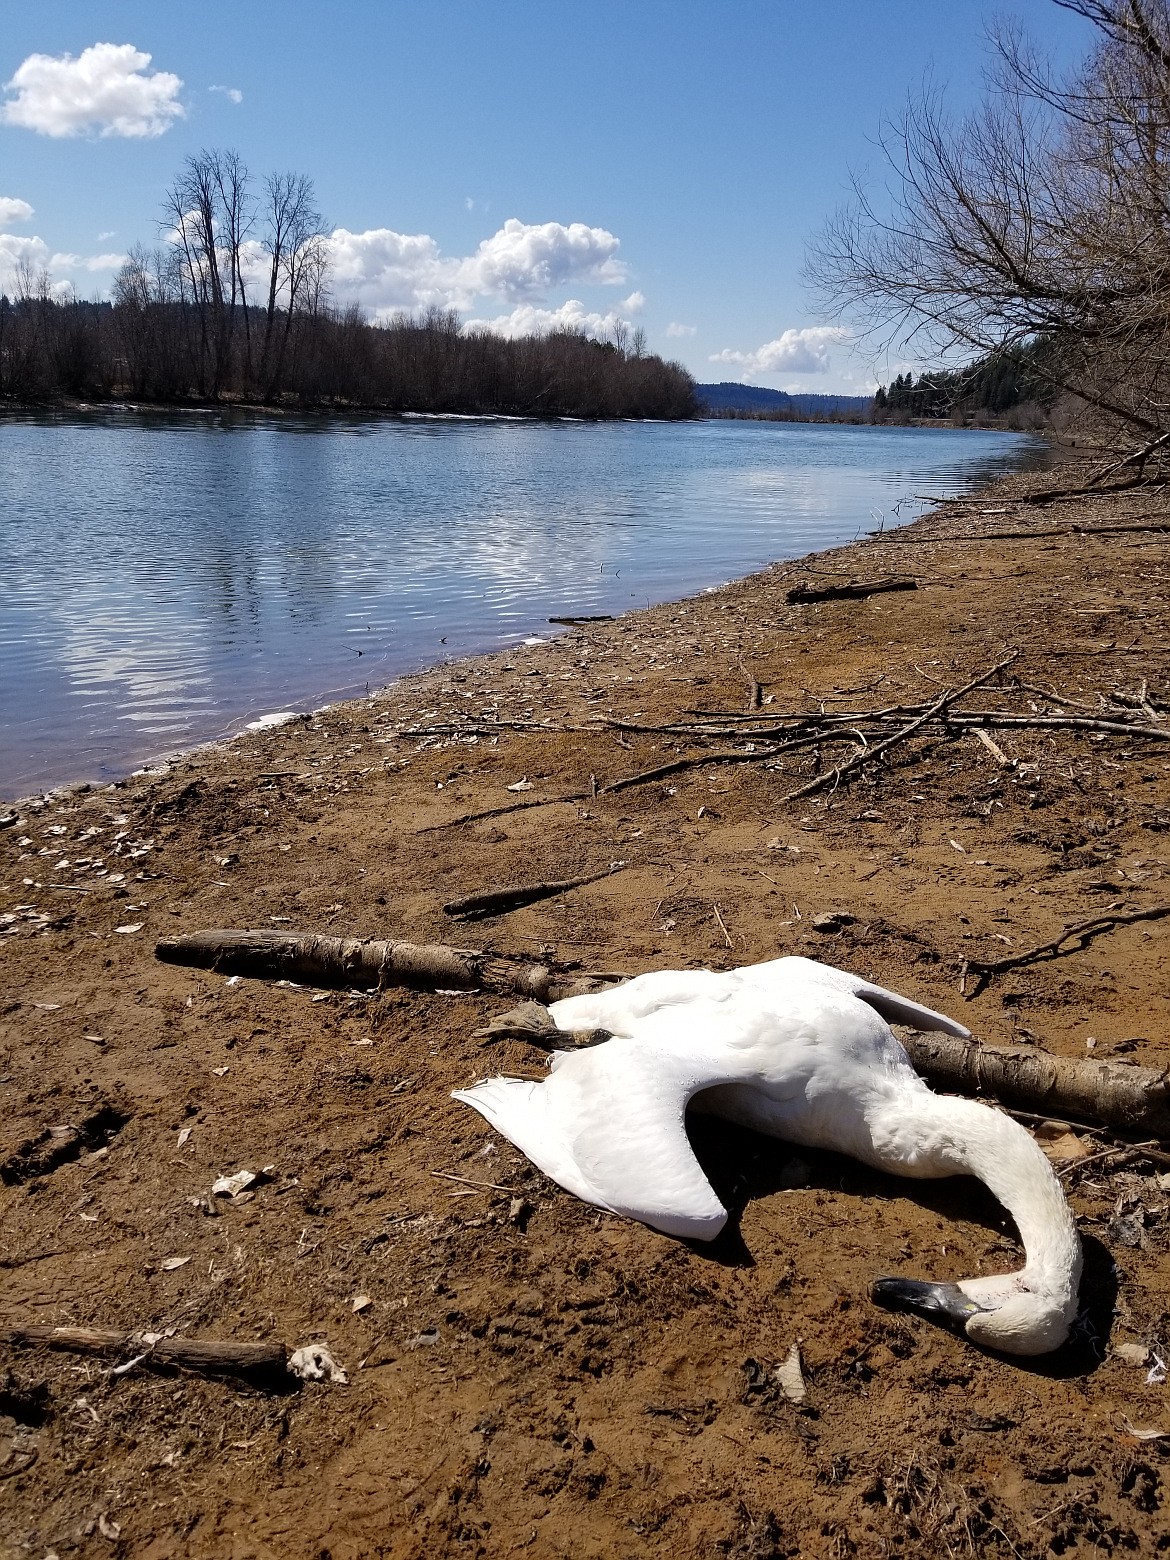 Photo courtesy Idaho Fish and Game
A dead tundra swan on Coeur d'Alene River, likely due to poisoning from historic mine waste contamination.